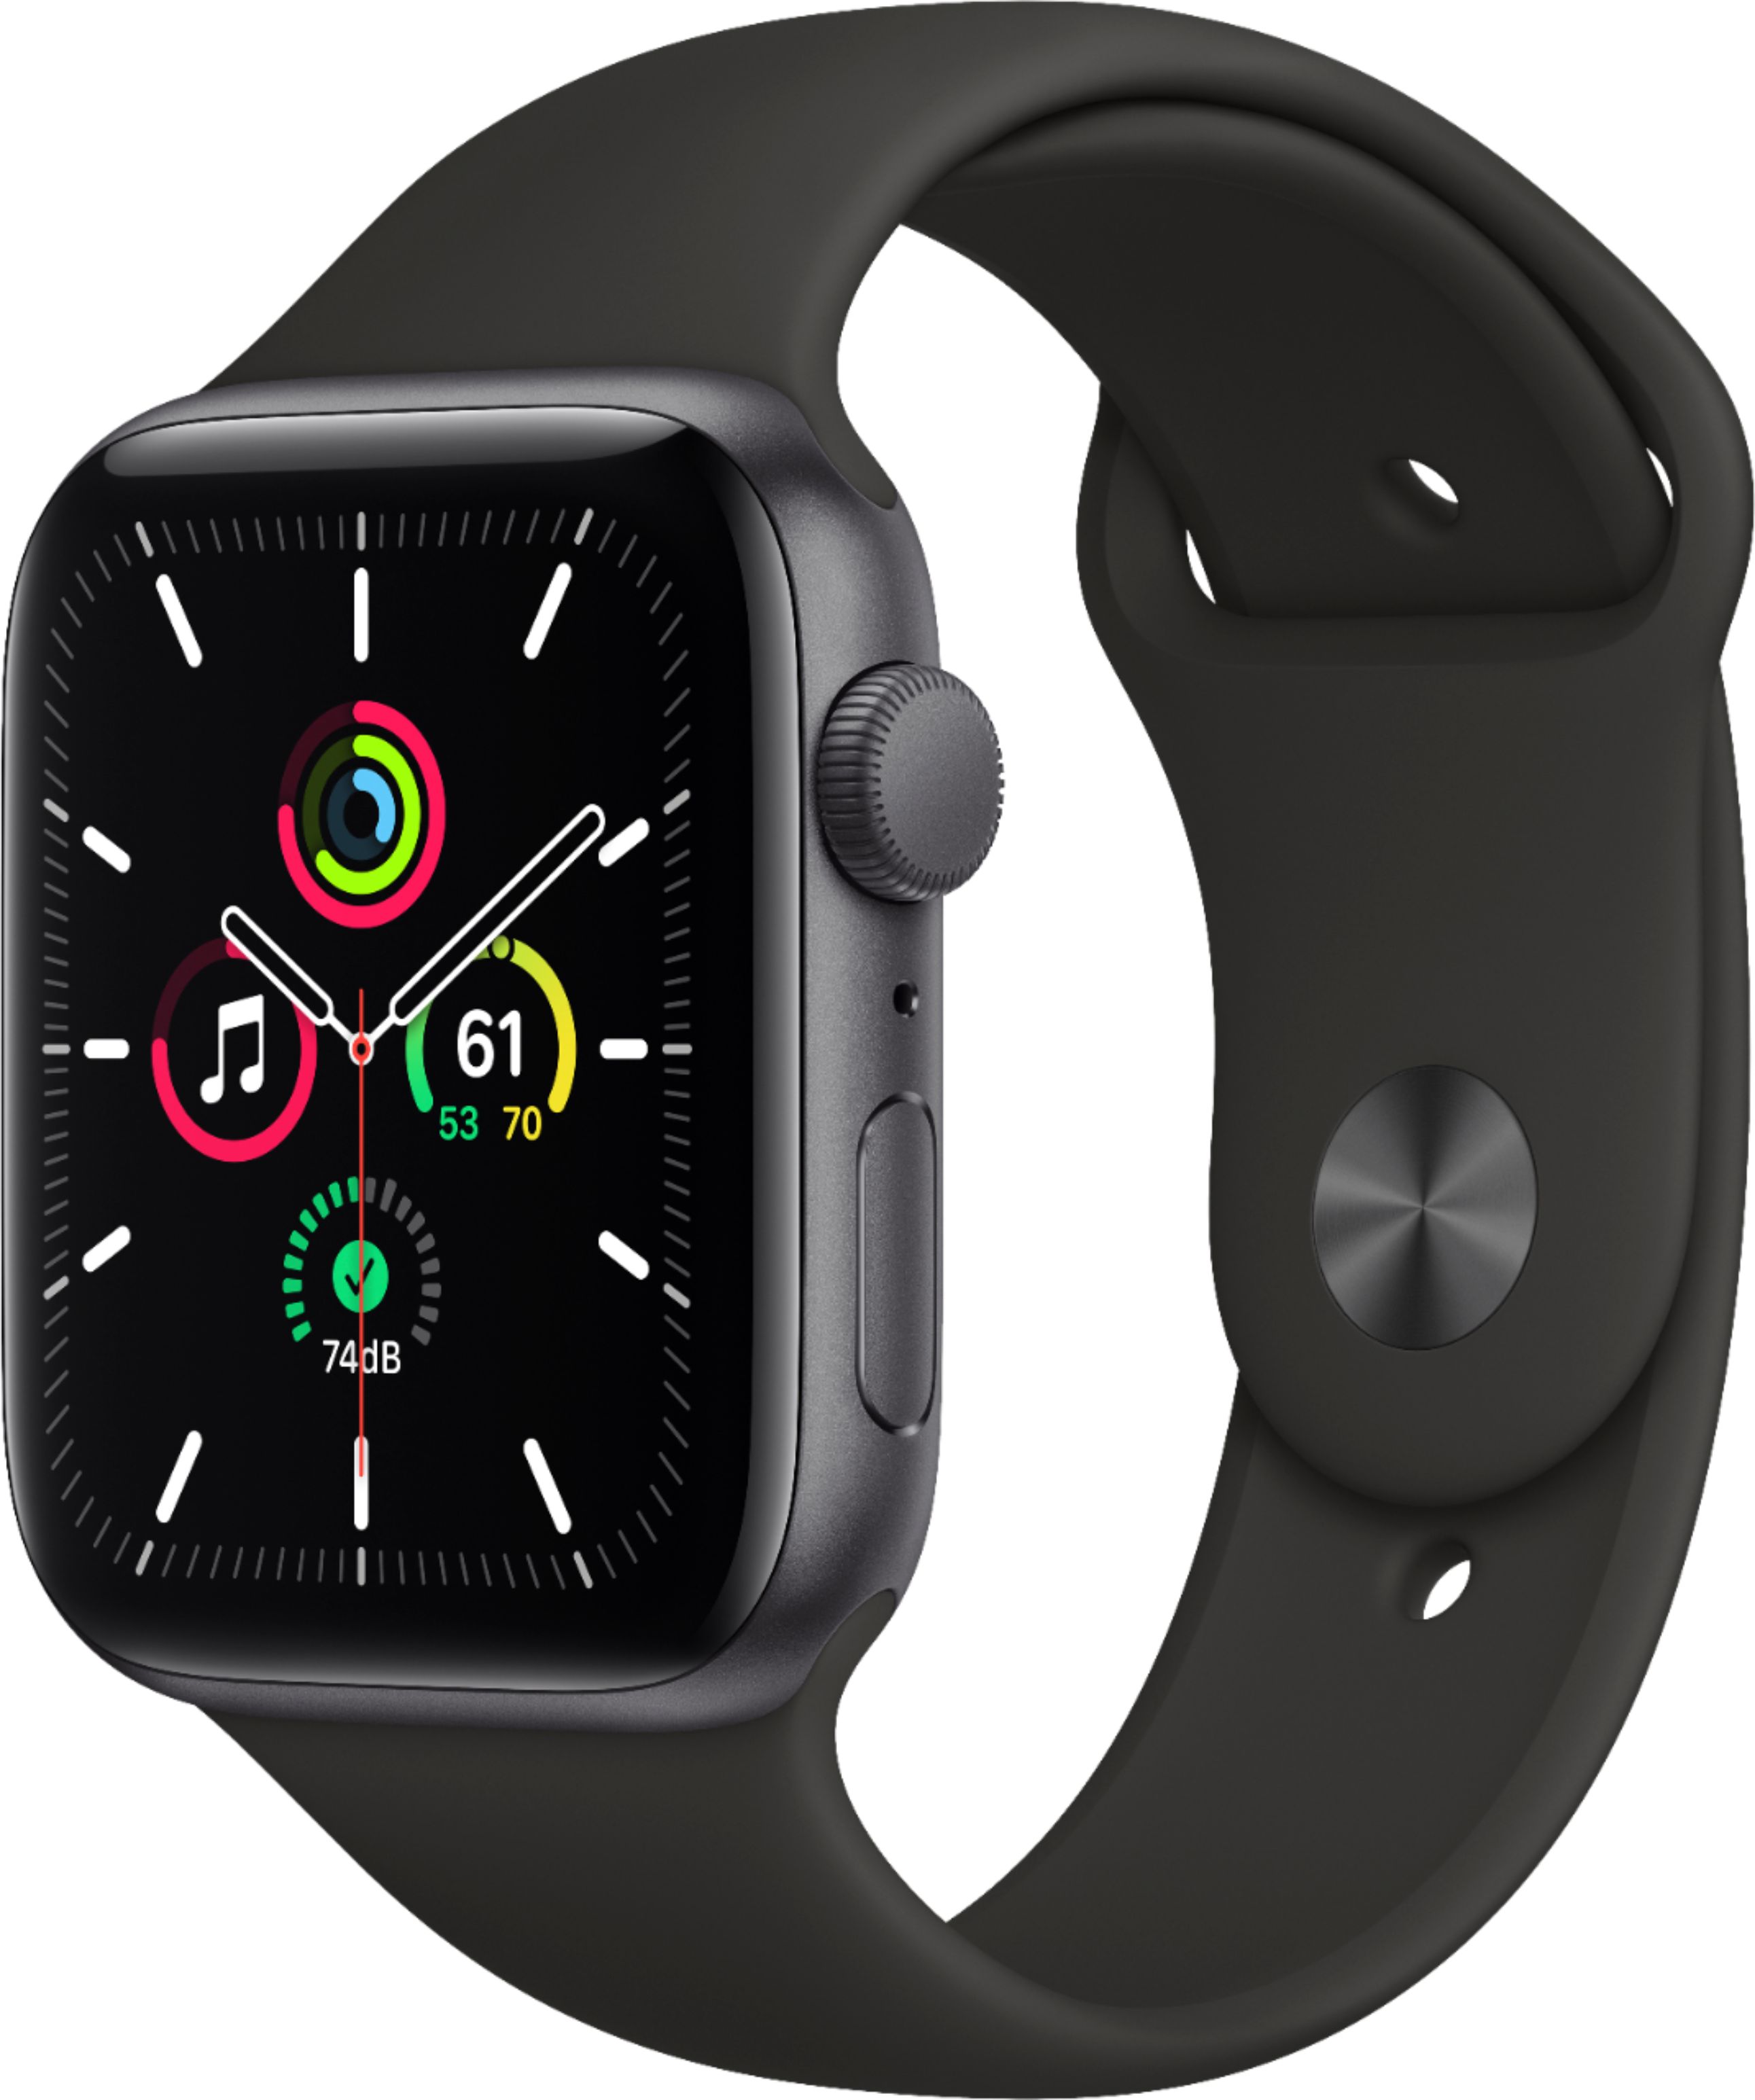 Apple Watch SE (GPS) 44mm Space Gray Aluminum Case with Black Sport Band - Space Gray